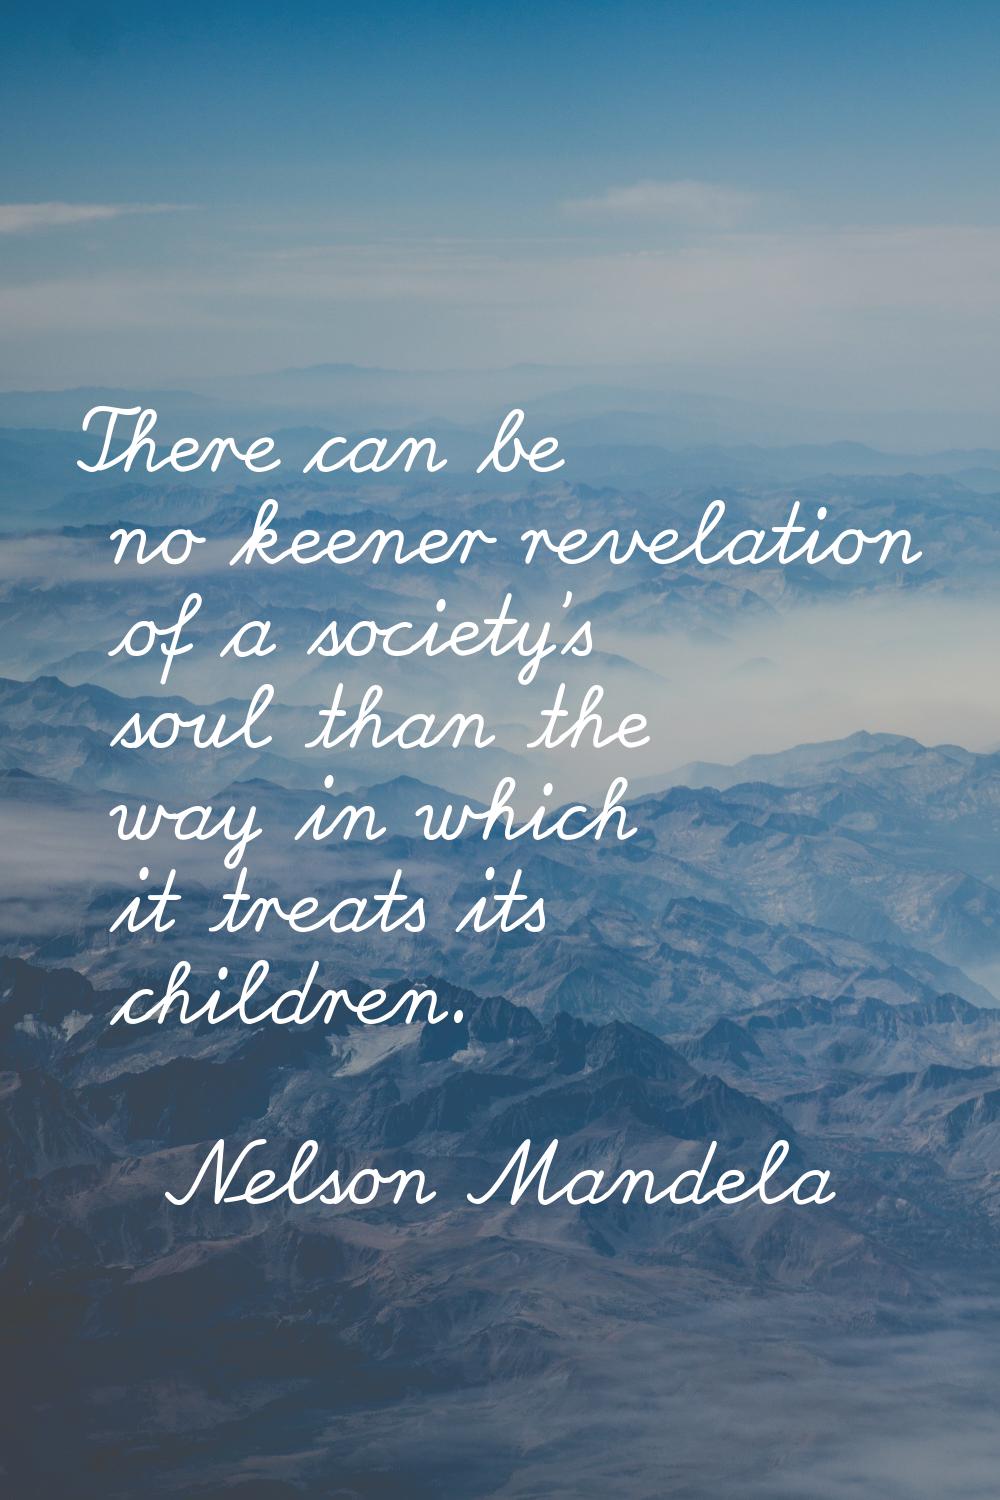 There can be no keener revelation of a society's soul than the way in which it treats its children.